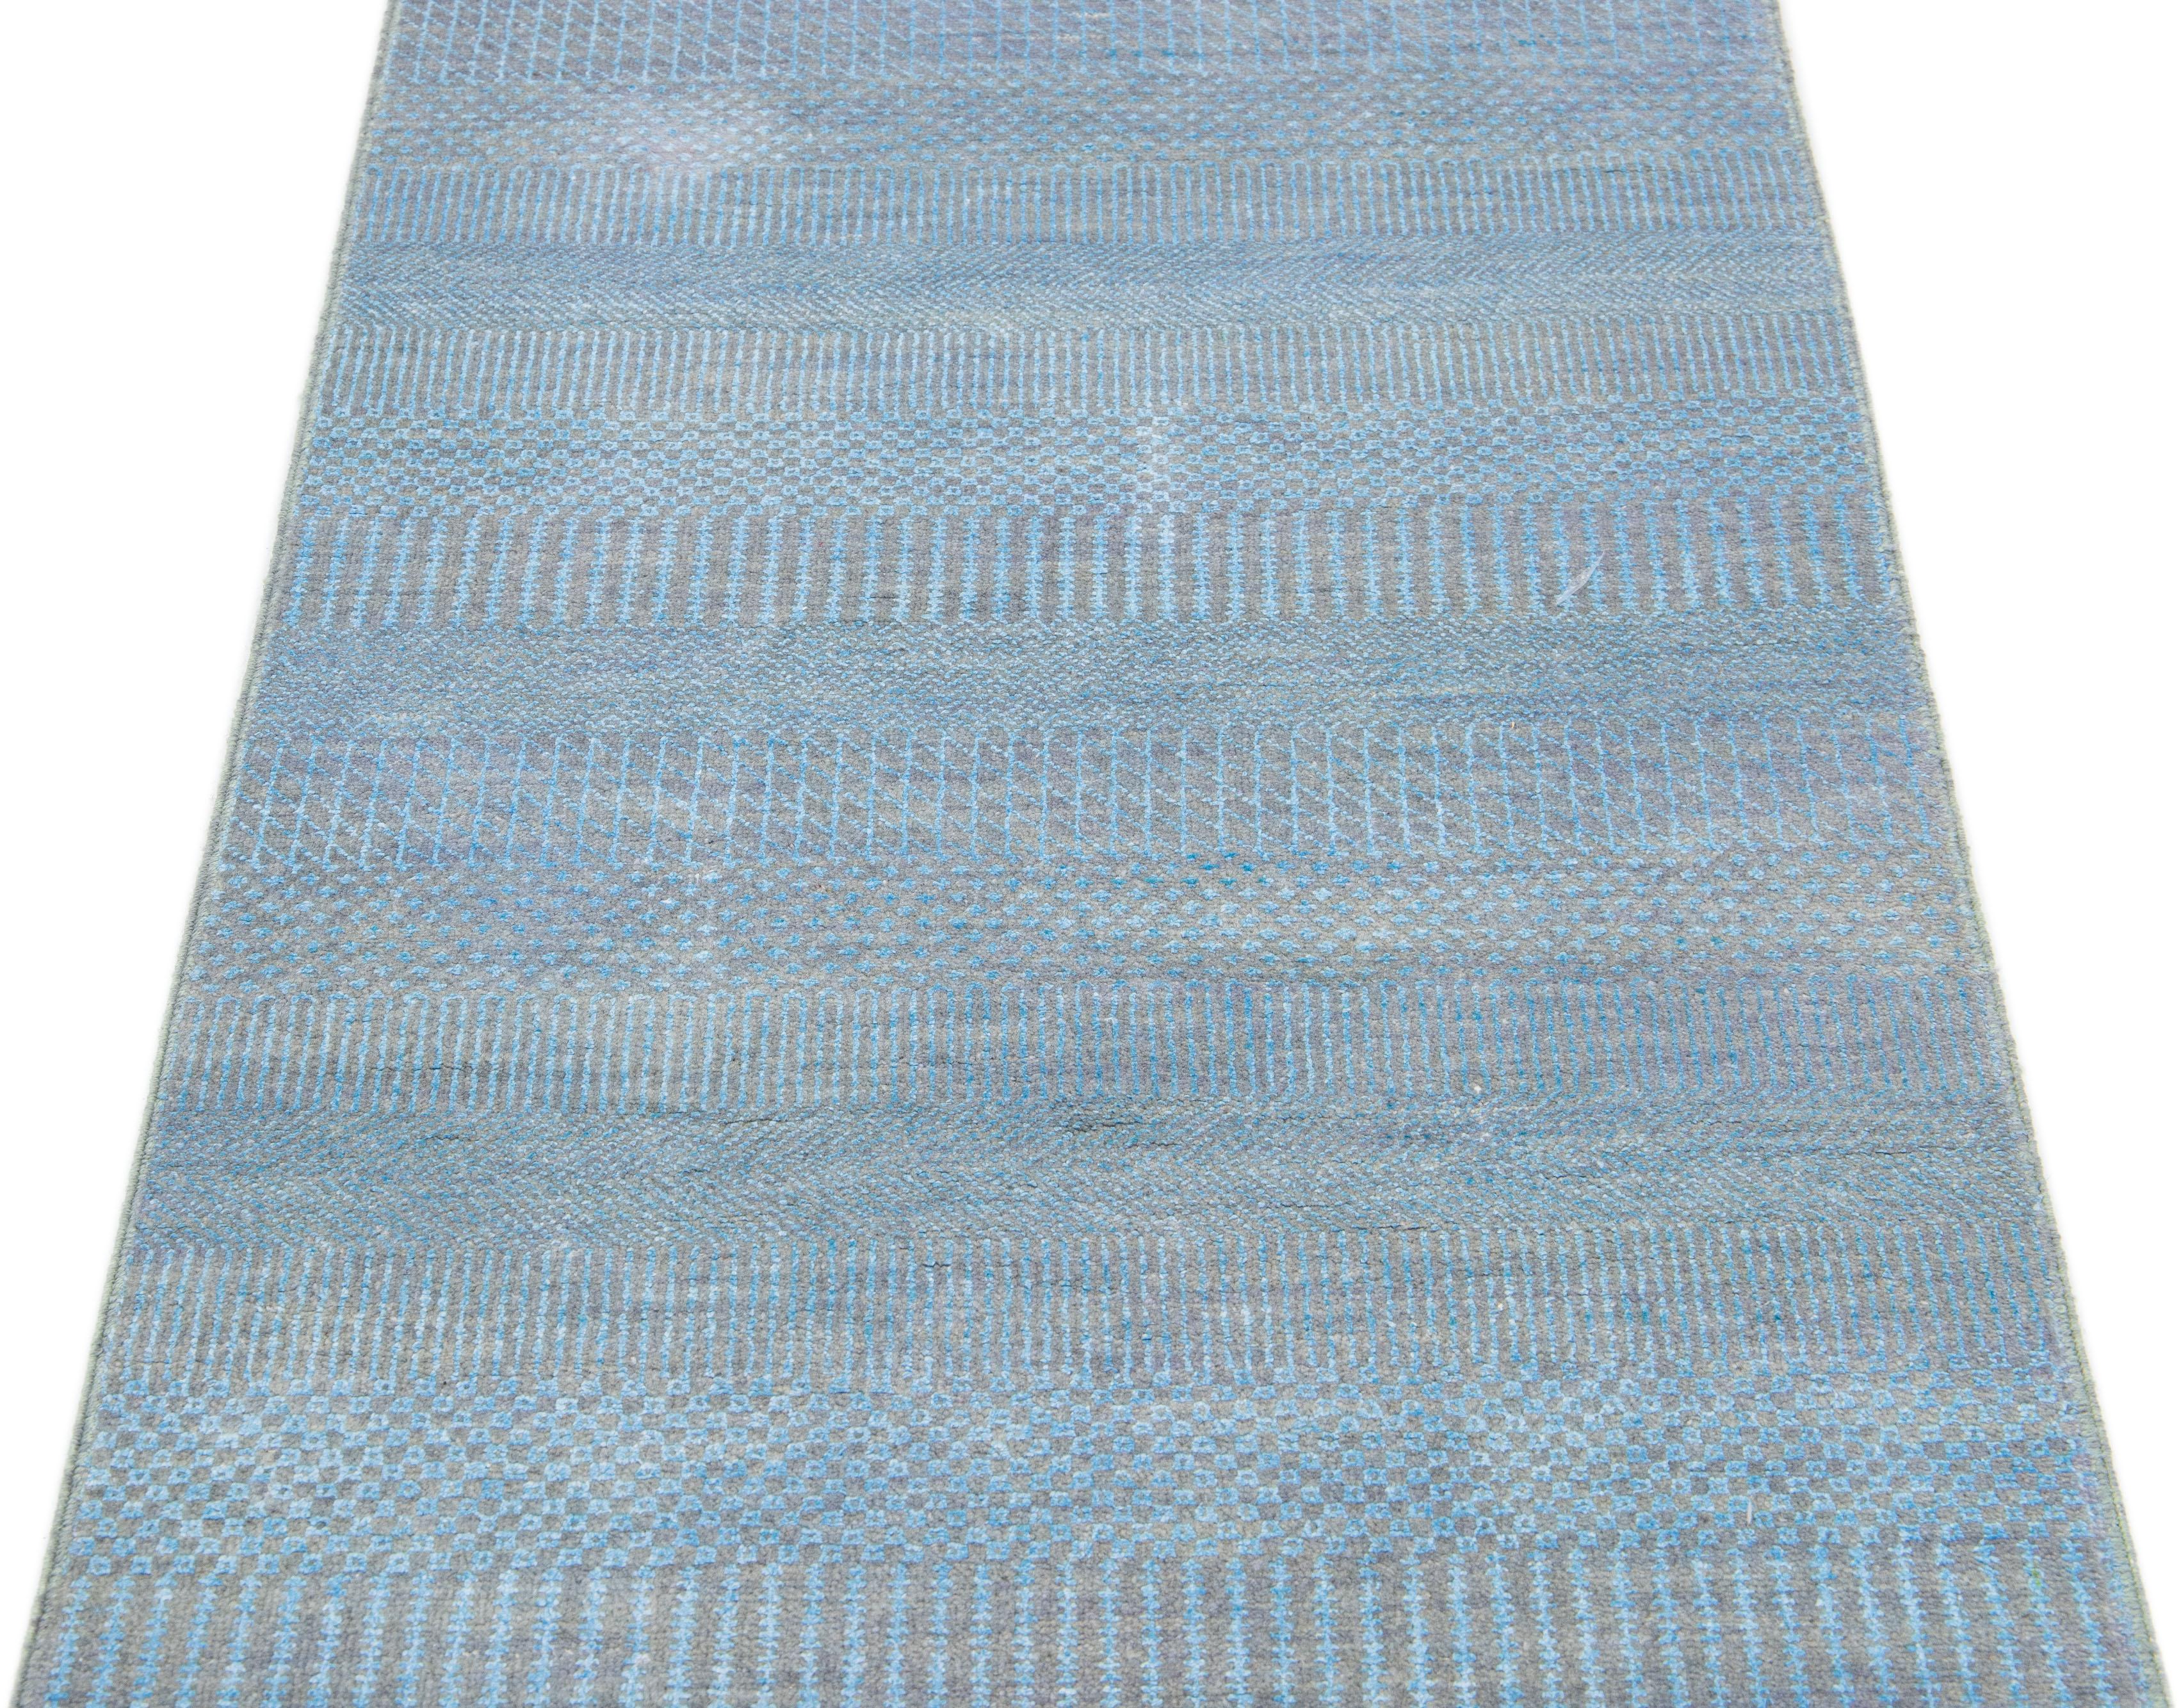 This long hand-knotted rug is made of wool. It features a subtle light blue color scheme accented by an all-over geometric pattern—an ideal addition to any contemporary interior.

This rug measures 2'7